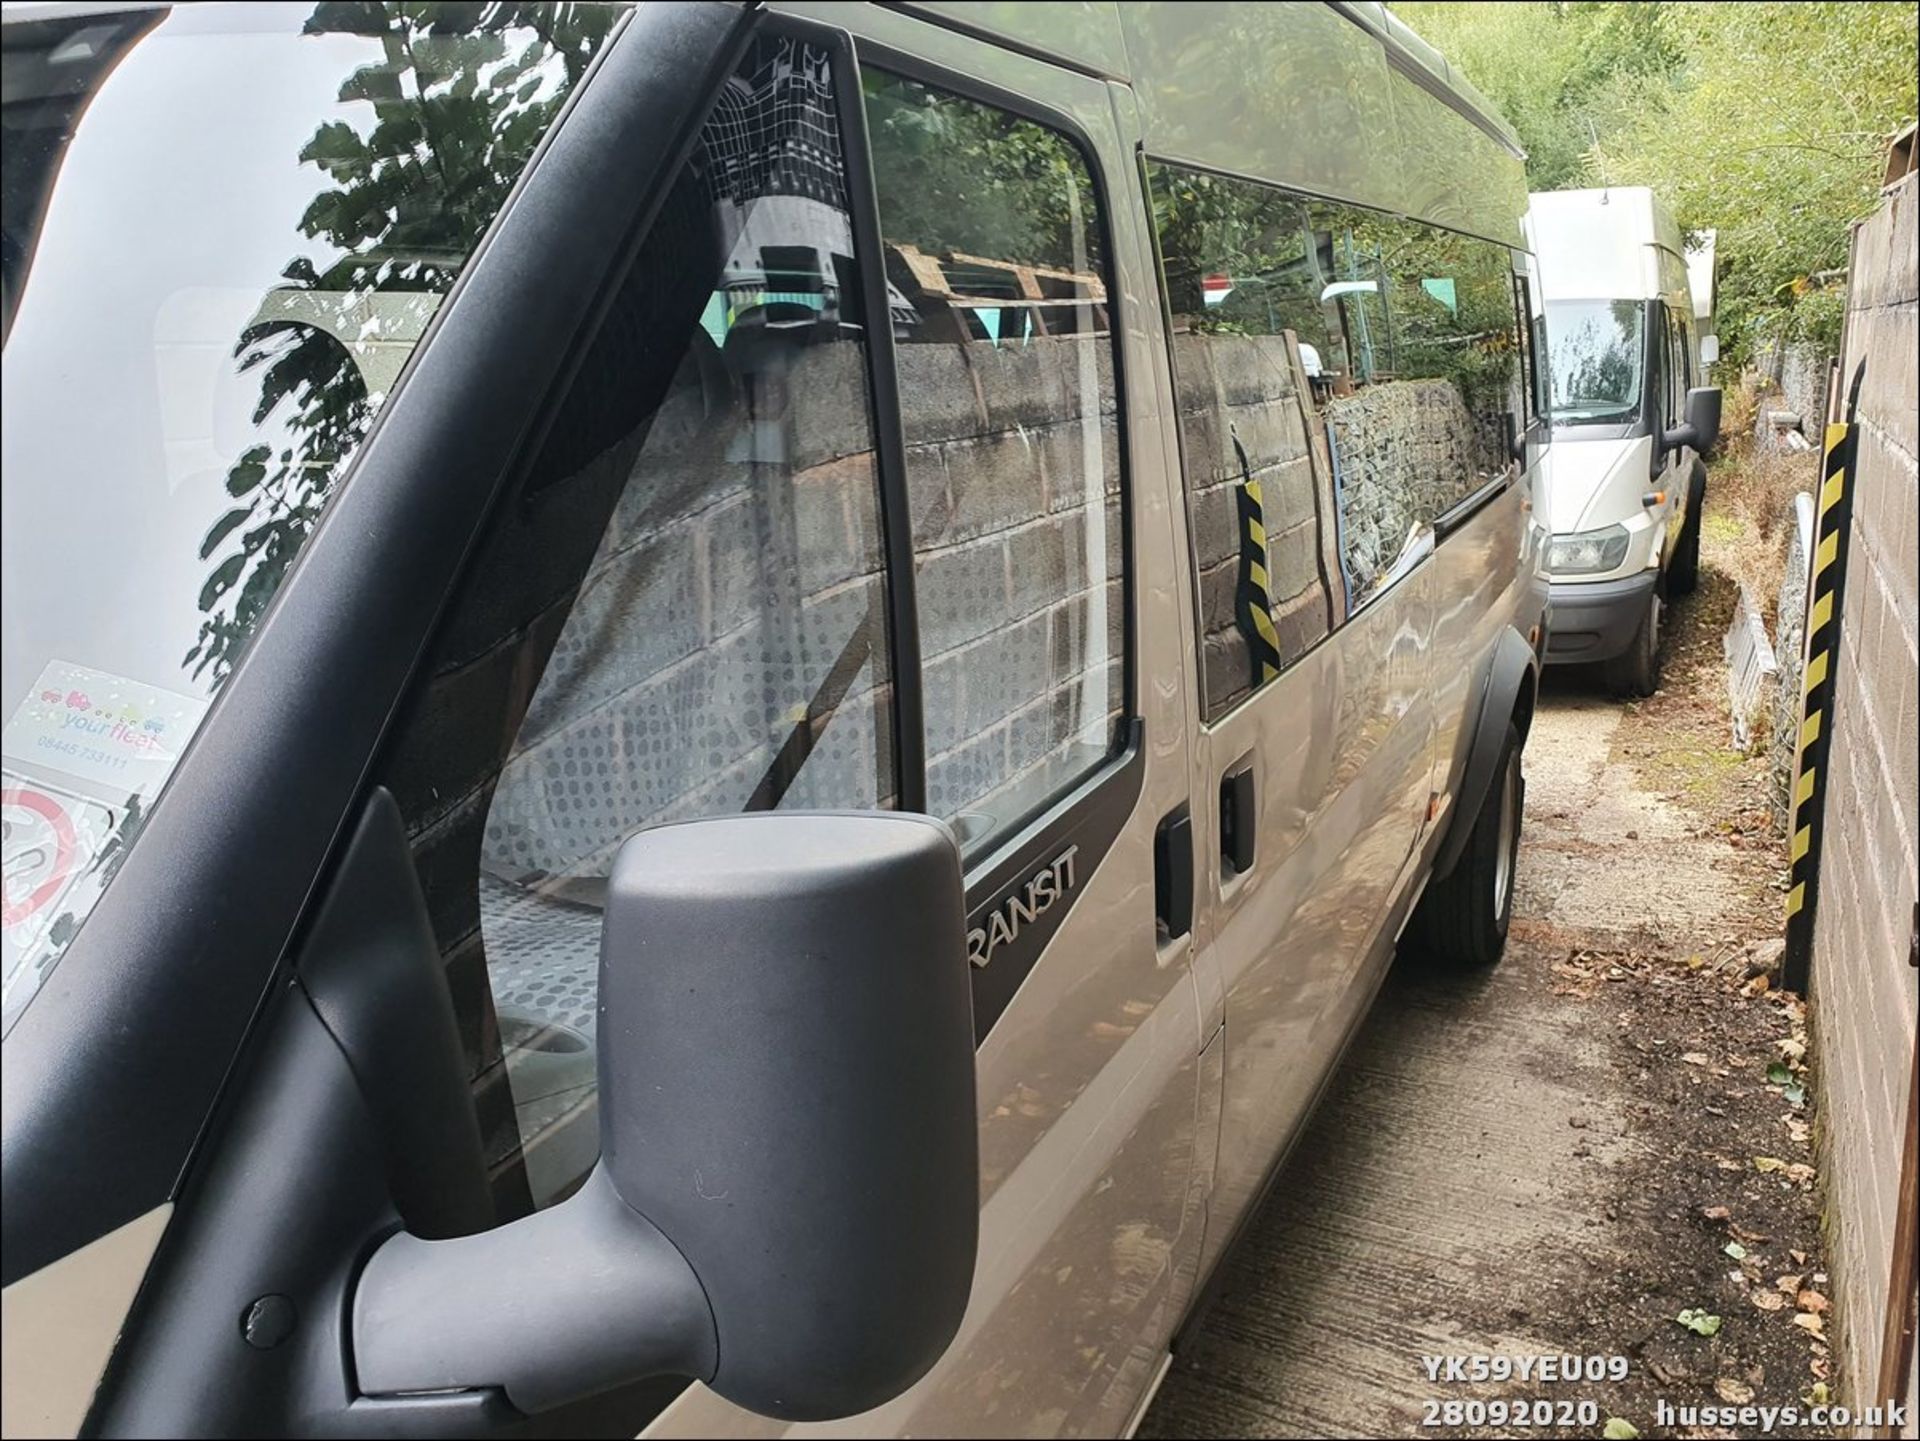 09/59 FORD TRANSIT 115 T430 17S RWD - 2402cc 5dr Minibus (Silver, 177k) - Image 9 of 9